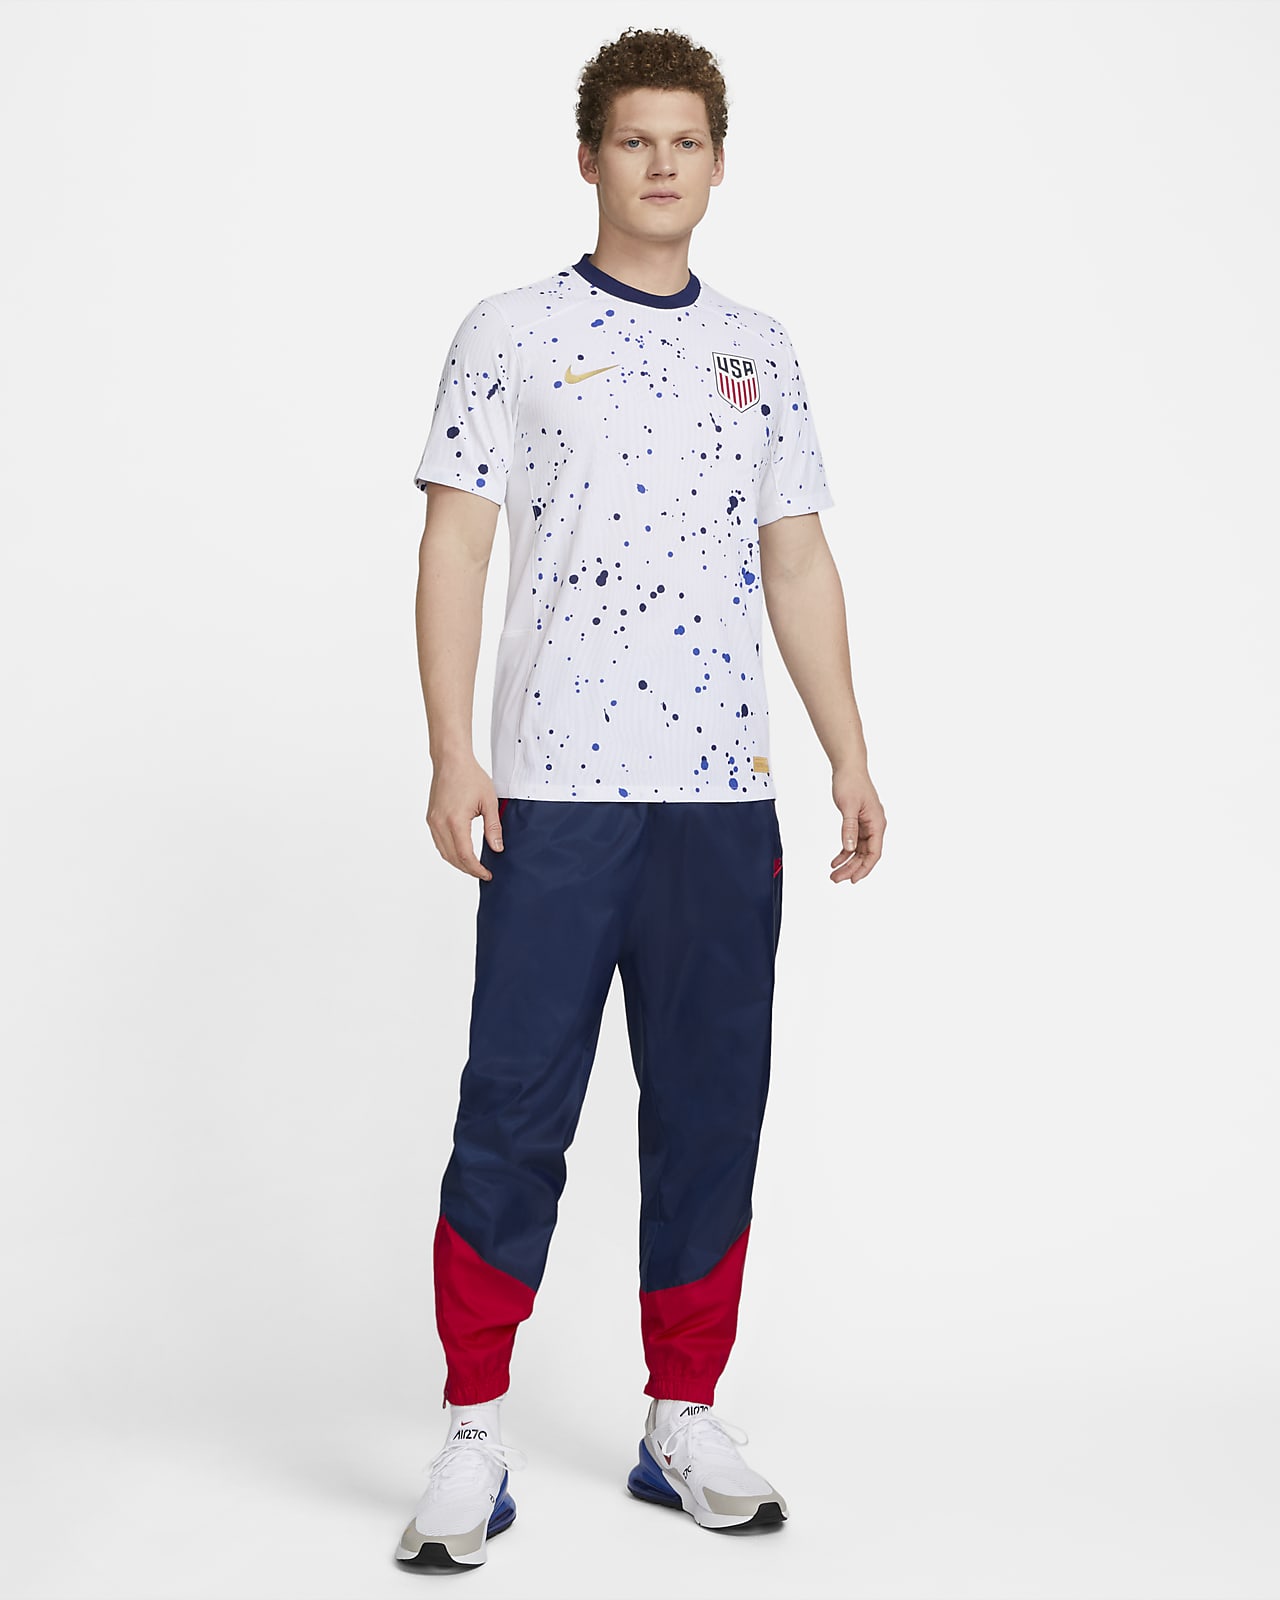 White Lacoste Game Advance - JD Sports Global